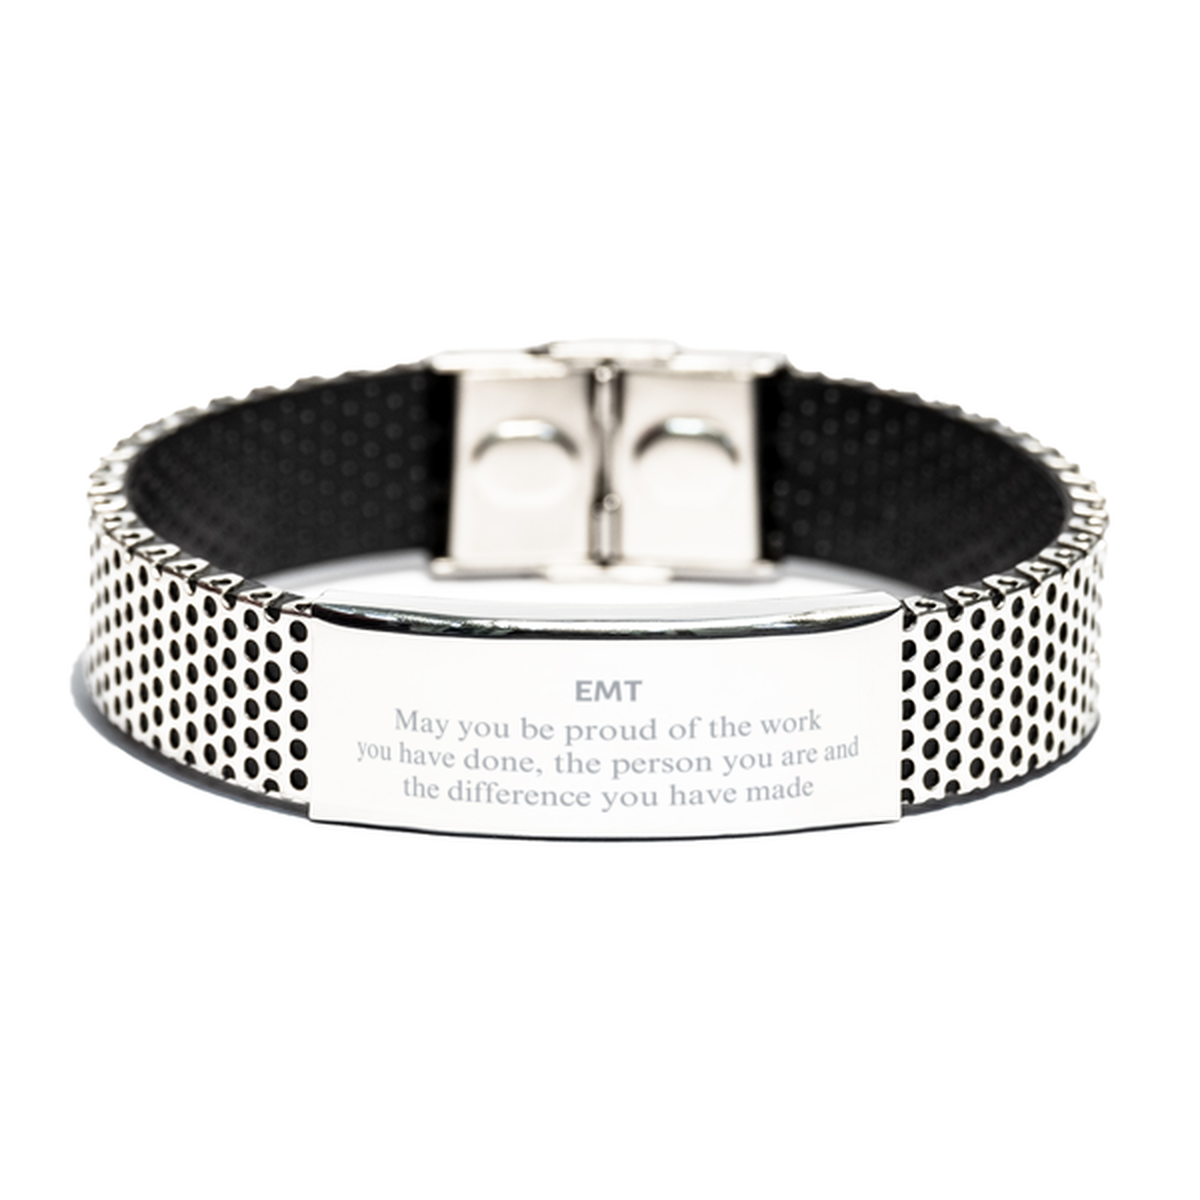 EMT May you be proud of the work you have done, Retirement EMT Stainless Steel Bracelet for Colleague Appreciation Gifts Amazing for EMT